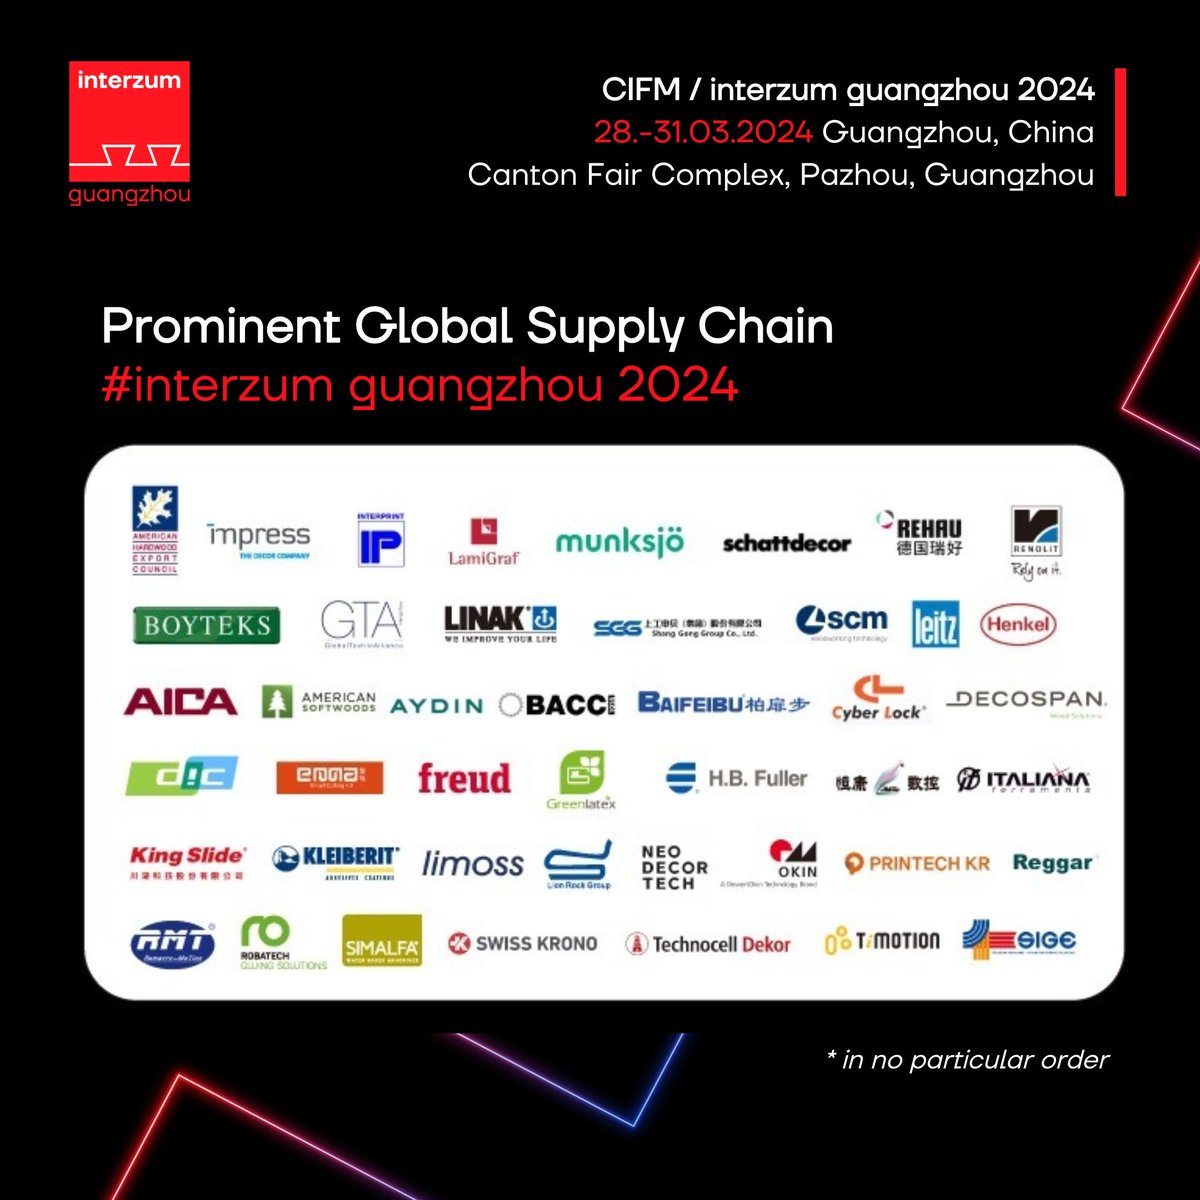 'Surpass' is the motto of this year's exhibition.

With over 220 prominent global brands, CIFM / interzum guangzhou 2024 aims to create a strong global network that covers the entire supply chain.
#interzumguangzhou #China #Guangzhou